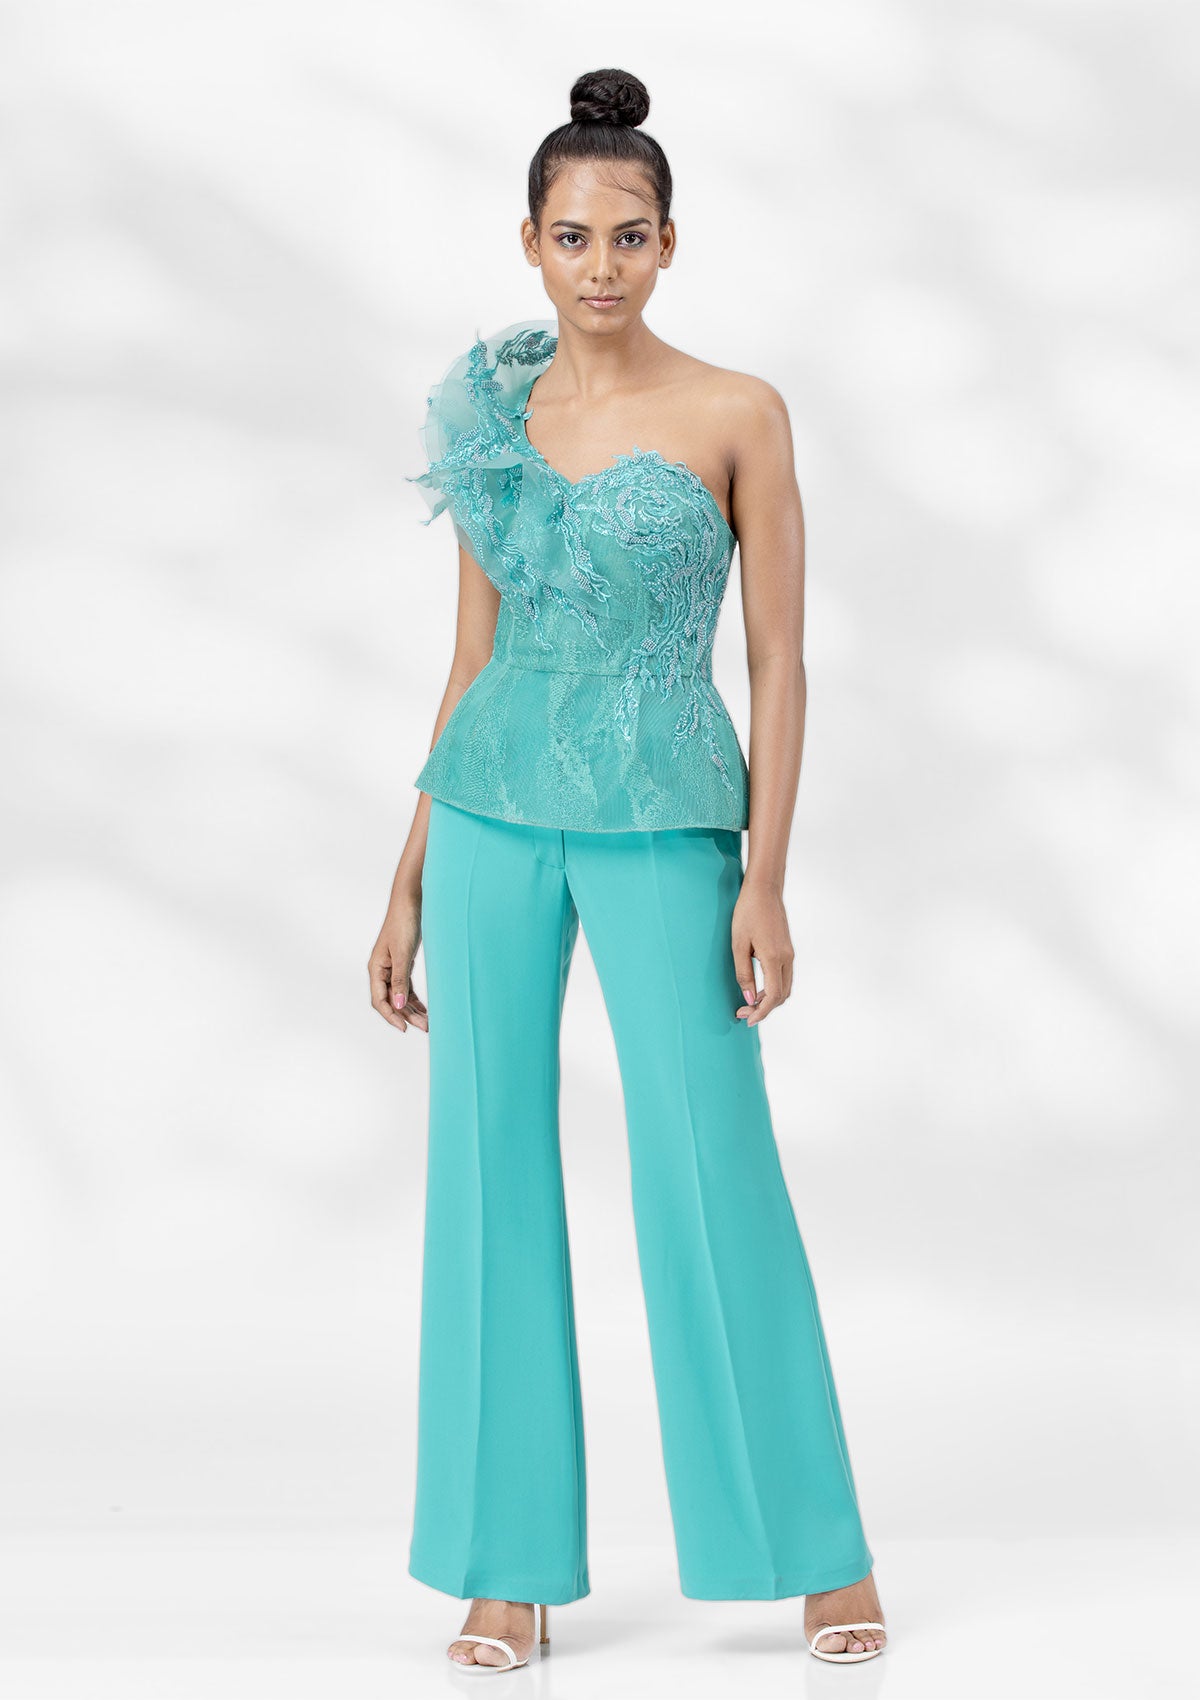 Lillian In Blue Ombre Top With Brocade Pants – Tanieyakhanuja